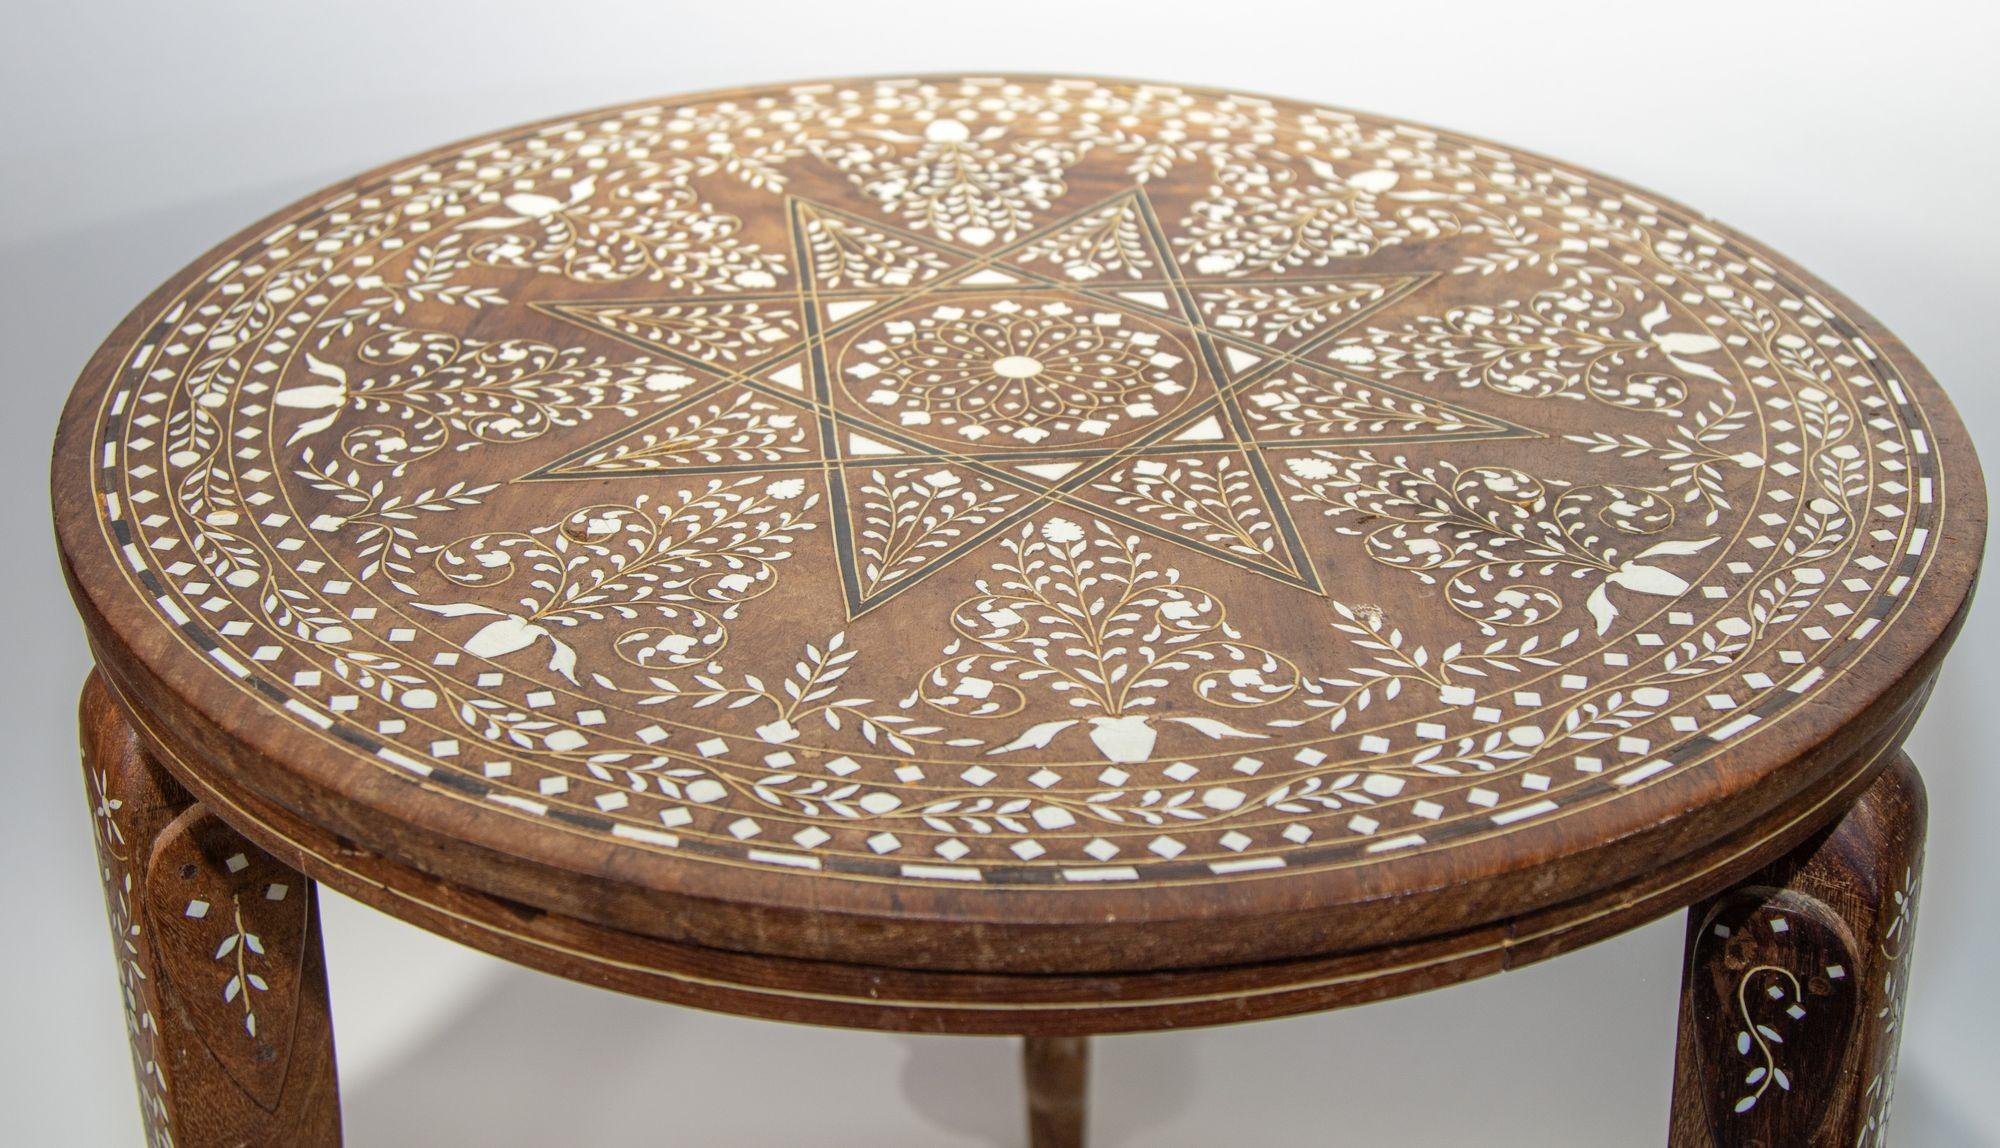 Antique 19th c. Anglo Indian Mughal teak inlaid side table.
Fine and elegant Moorish round side table hand carved with bone inlaid elaborate Moorish geometric design.
With elephant inlaid bone figurative detail on the 3 supporting legs.
Size: 20